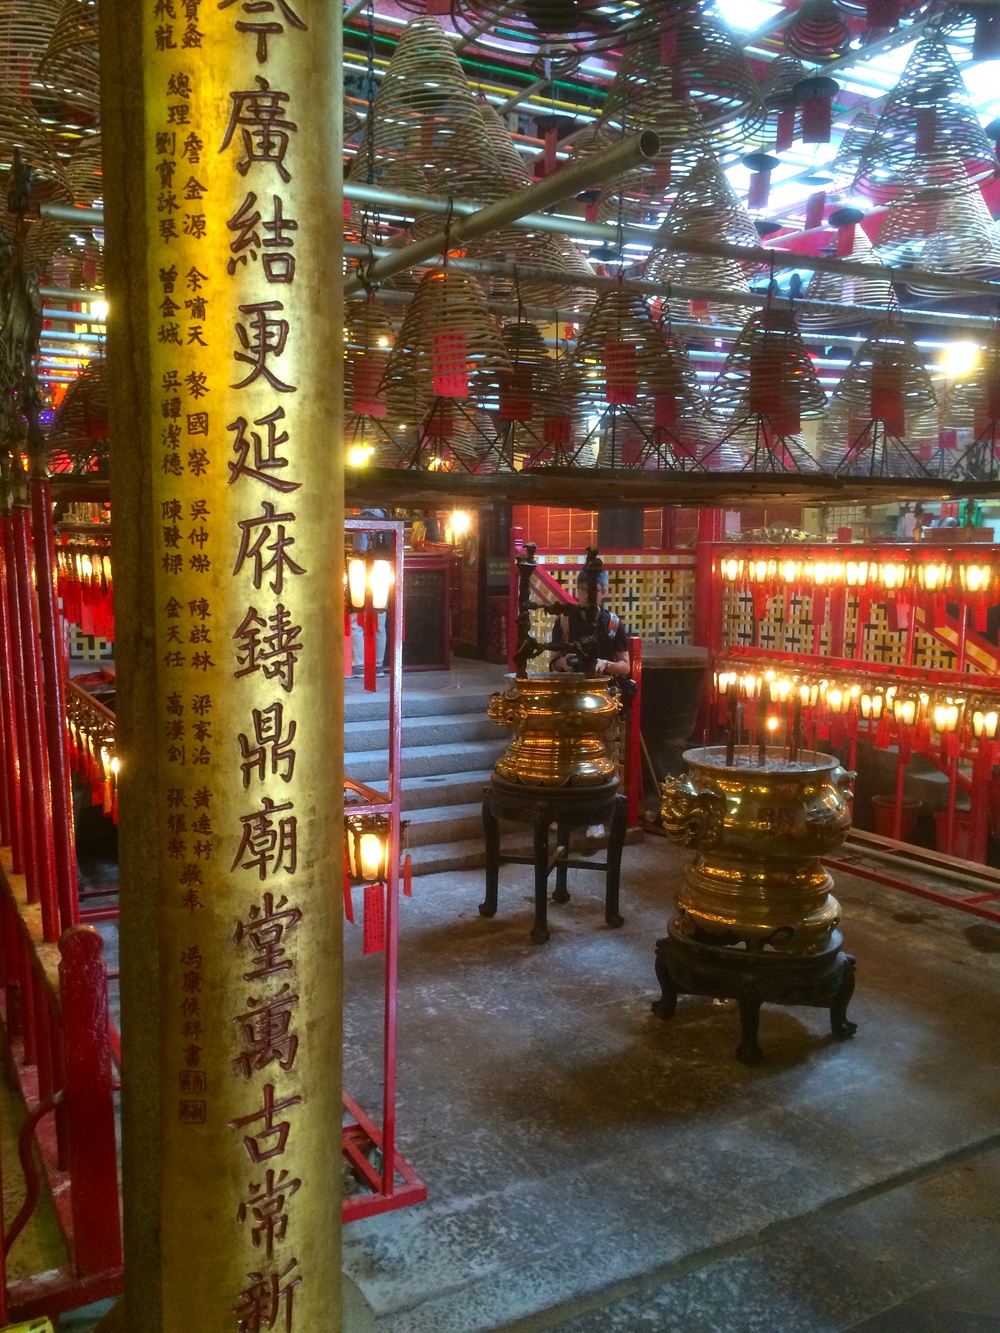  inside the temple. &nbsp;those are coils of incense hanging overhead. 